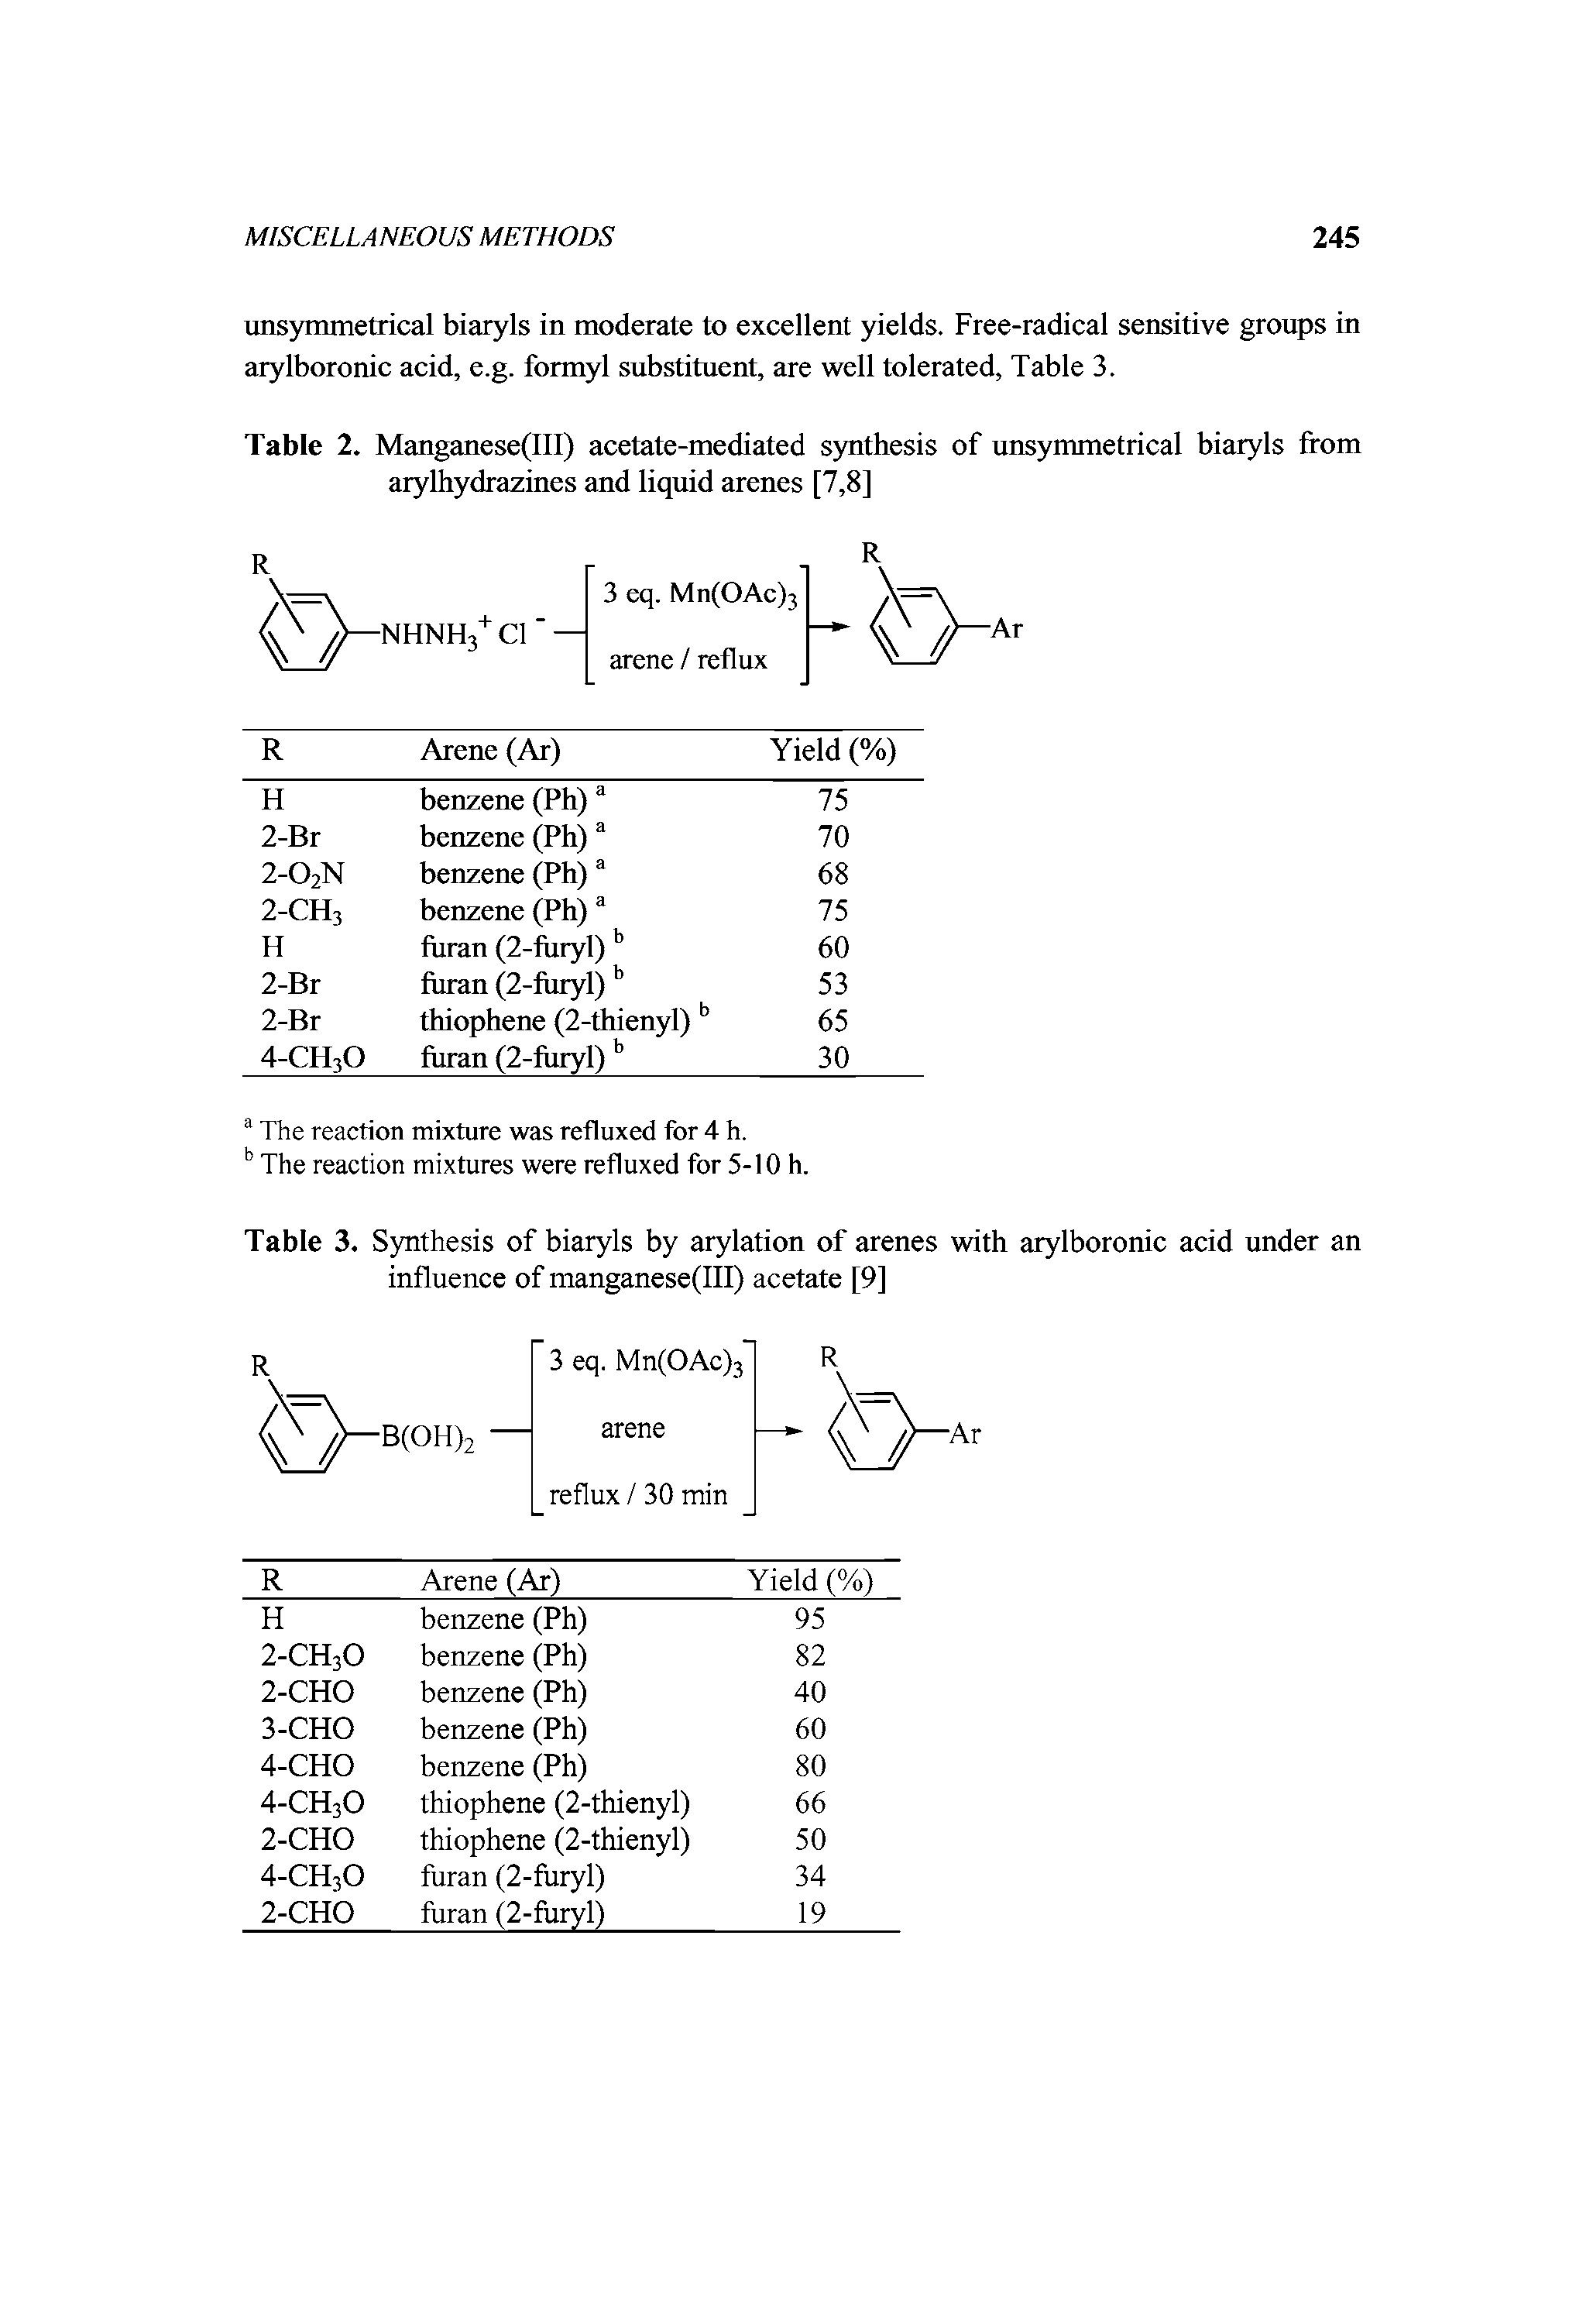 Table 2. Manganese(lll) acetate-mediated synthesis of unsymmetrical biaryls from arylhydrazines and liquid arenes [7,8]...